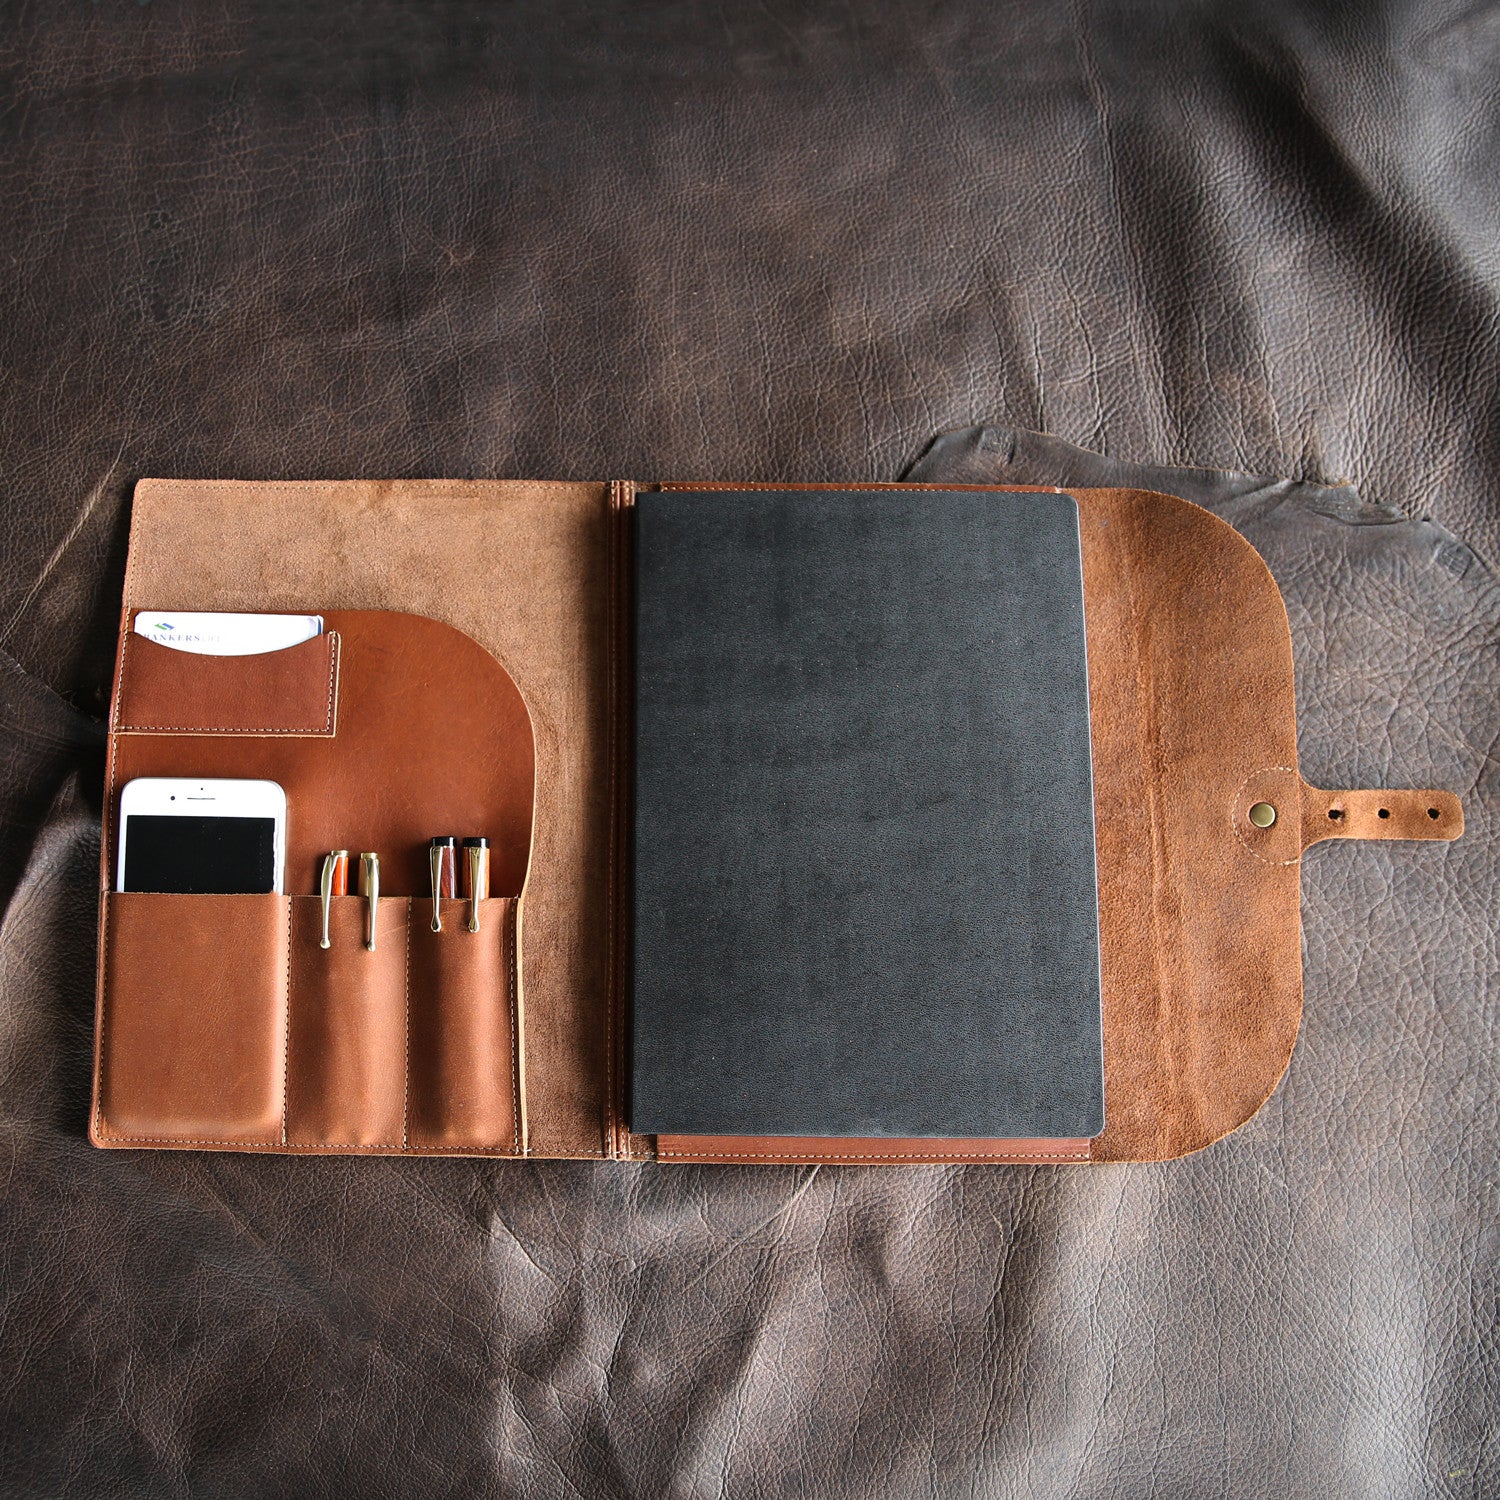 Leather journal cover with personalized logo from Holtz Leather Co in Huntsville, Alabama